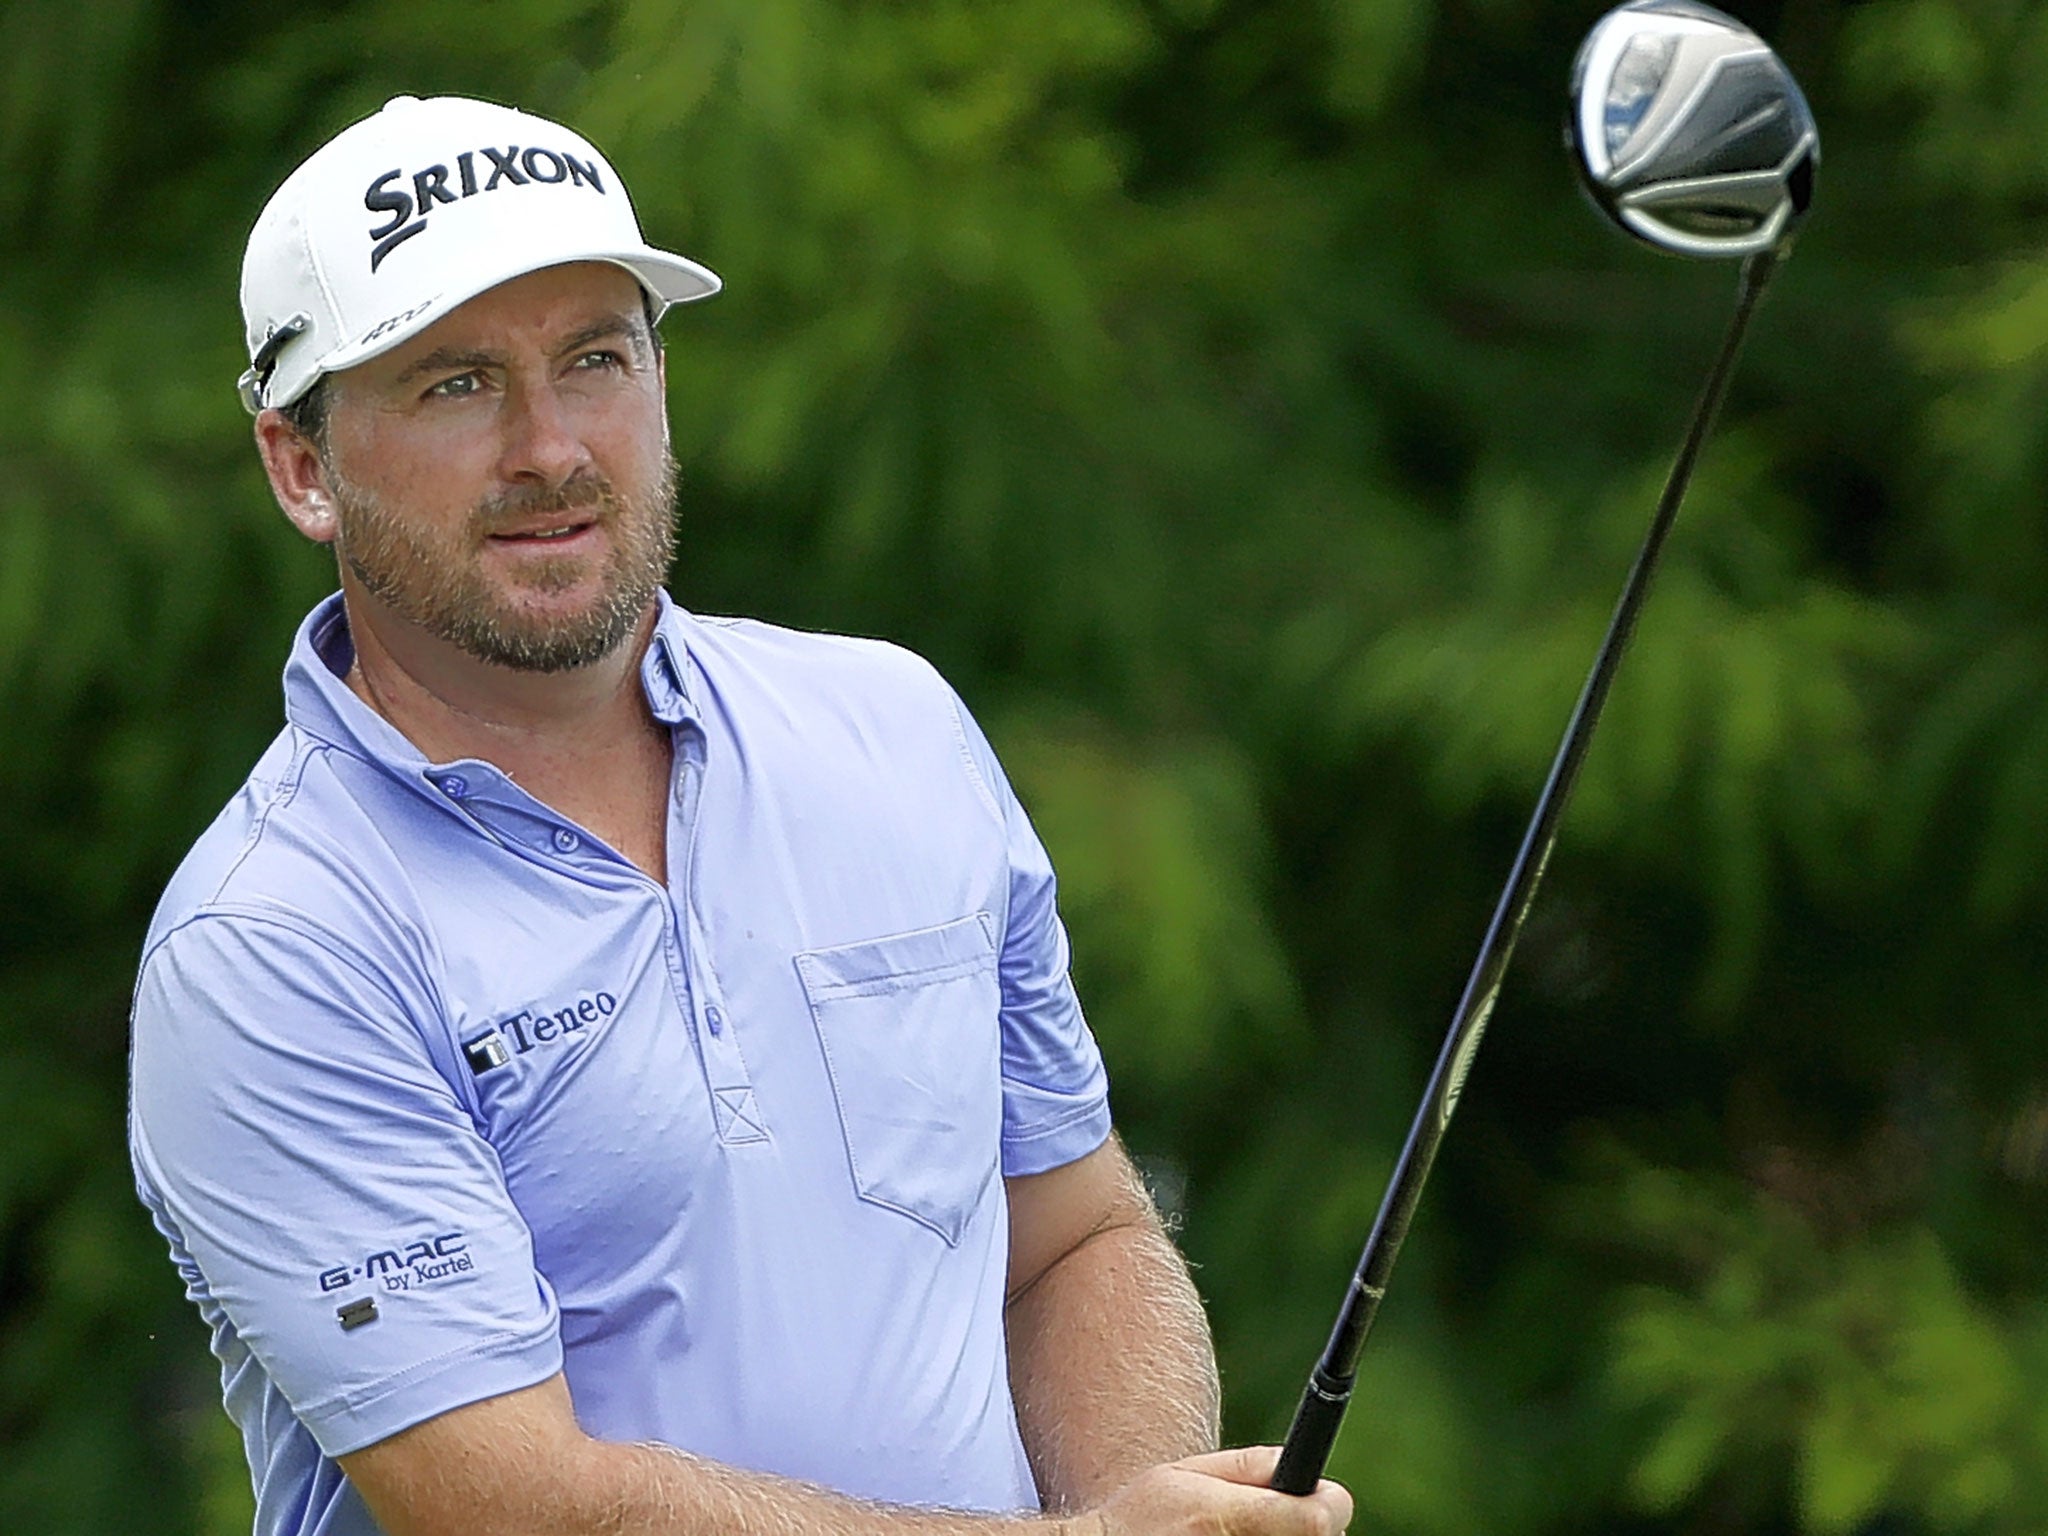 Graeme McDowell has been named as one of Thomas Bjorn’s vice-captains